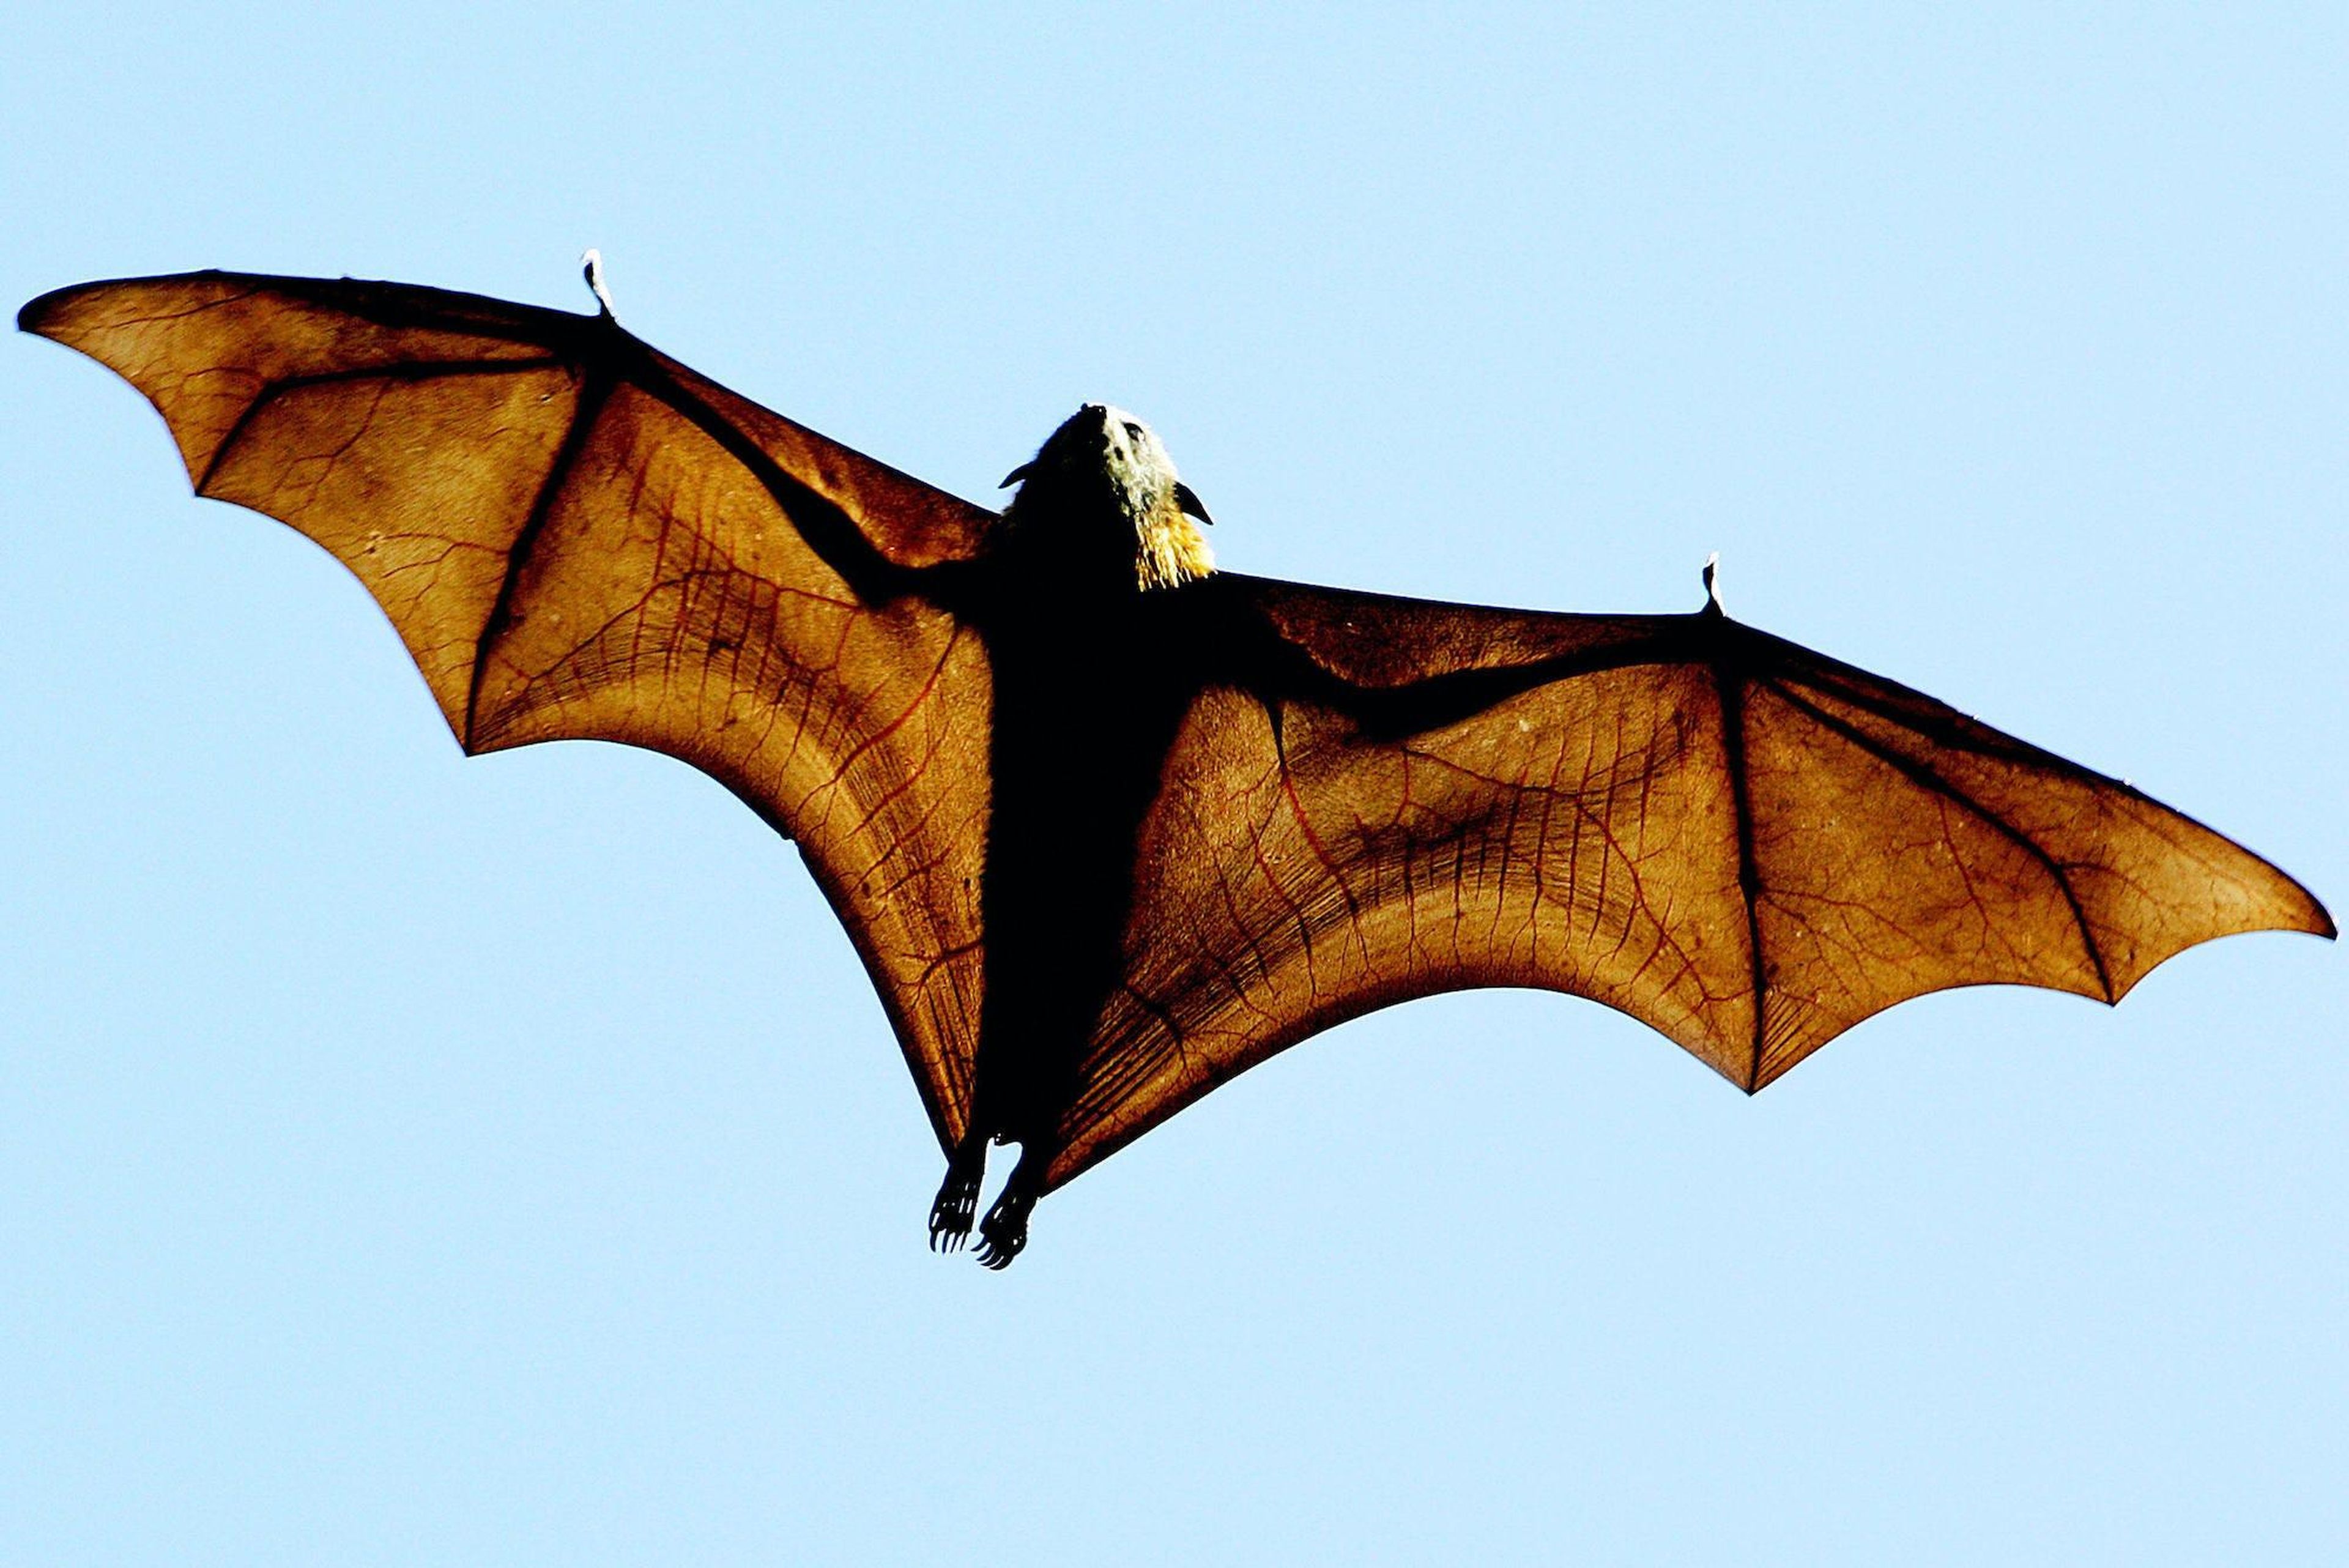 grey-headed Flying-fox (Pteropus poliocephalus), a native Australian bat, stretches its leathery wings as it flies high over Sydney's Botanical Gardens